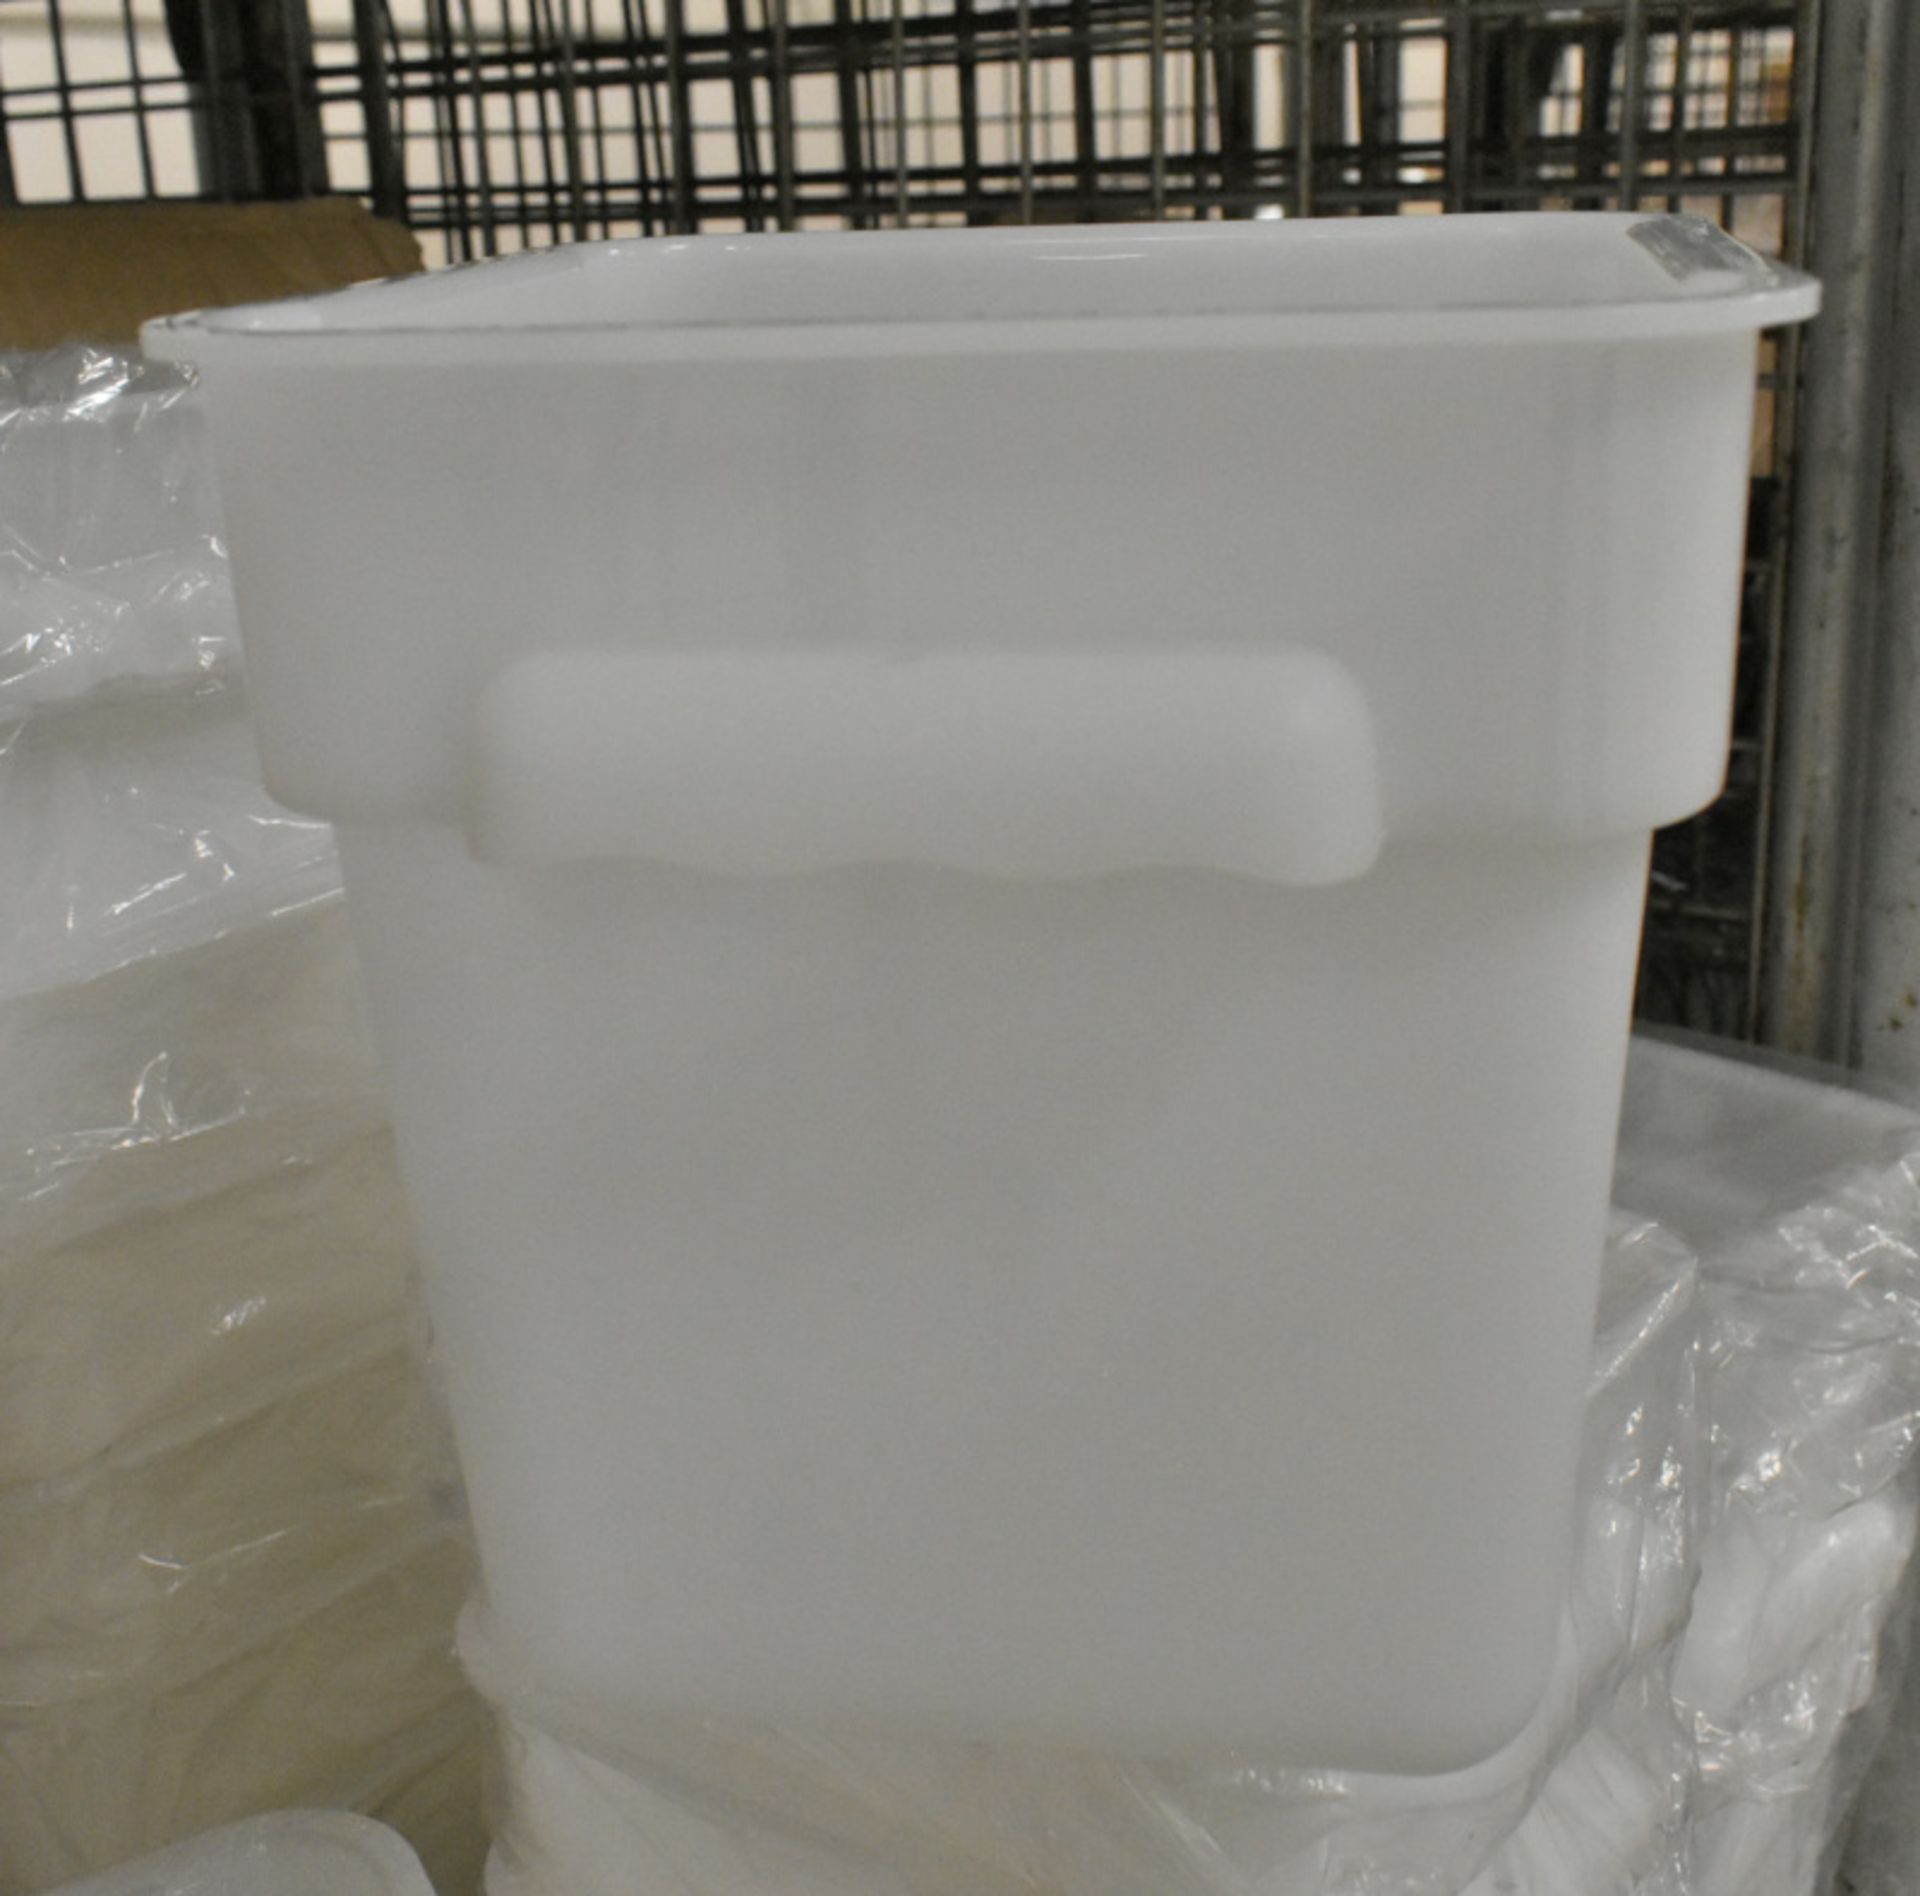 Various Catering Equipment - 72x Transworld Clear Plastic Containers, 23x White Plastic Tubs - Image 5 of 8